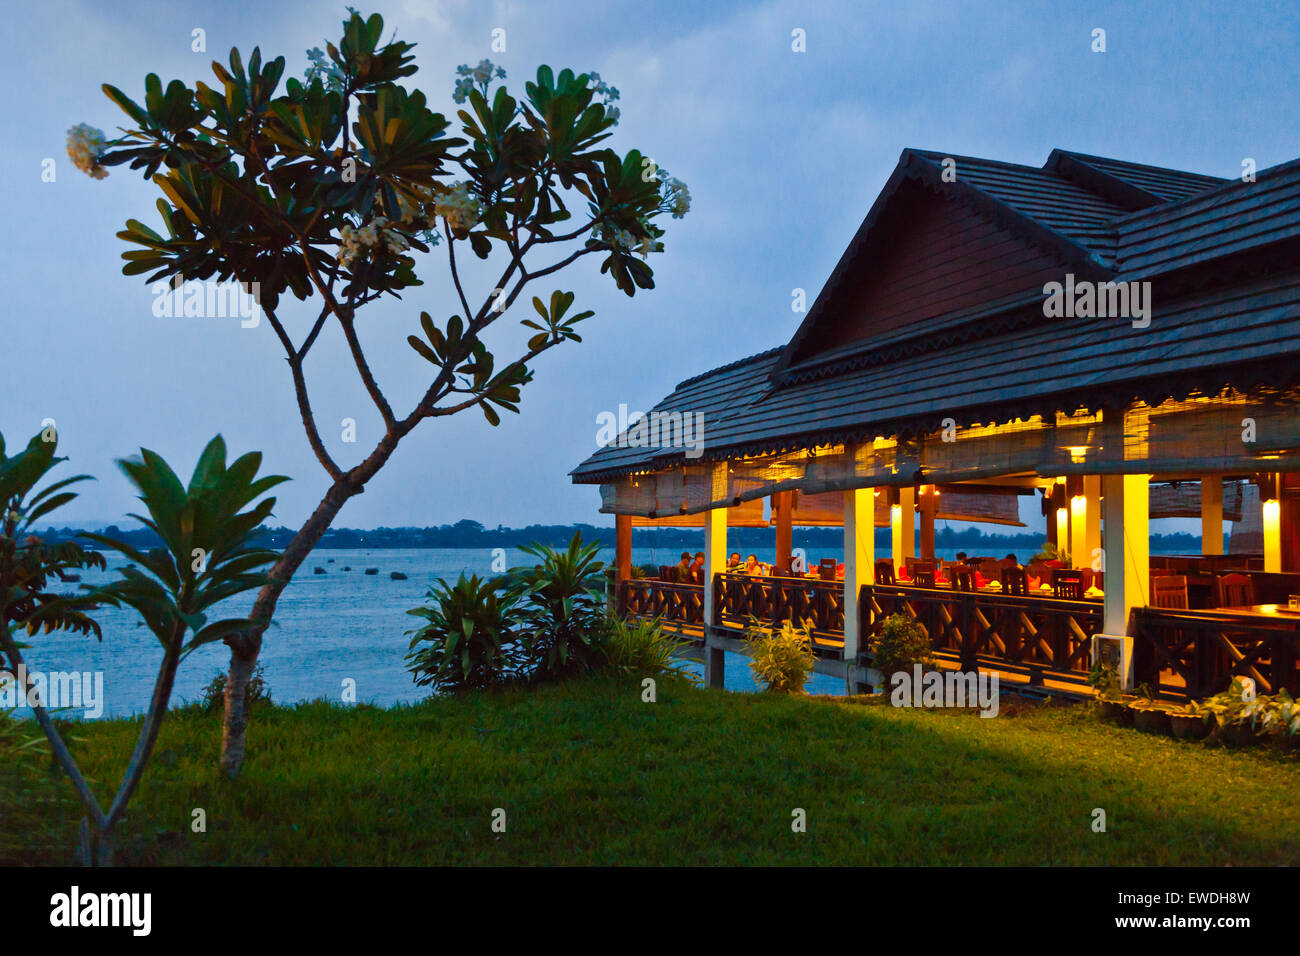 The PAN ARENA HOTEL RESTAURANT on DON KHONG ISLAND in the 10 Thousand Islands area of the Mekong River - SOUTHERN, LAOS Stock Photo